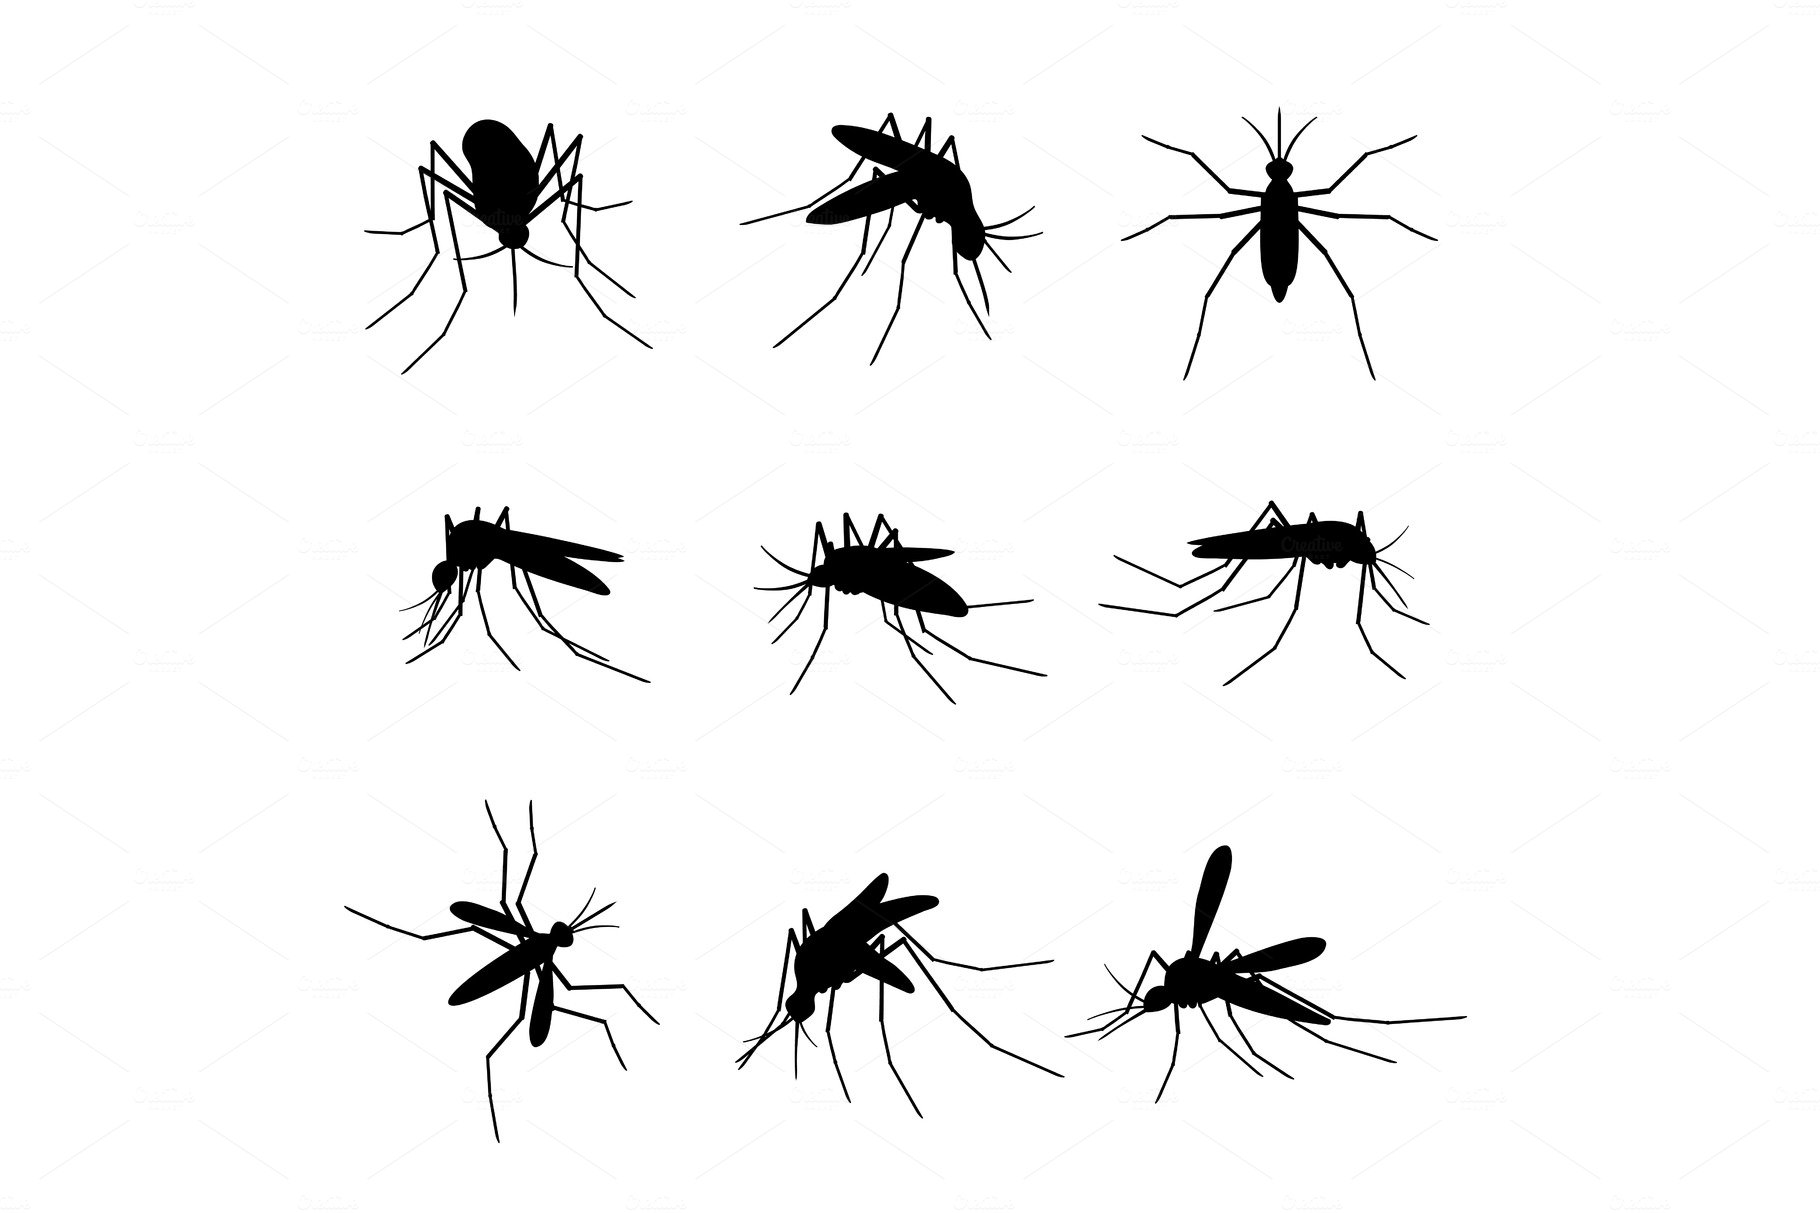 Mosquito silhouettes. Swarm flying cover image.